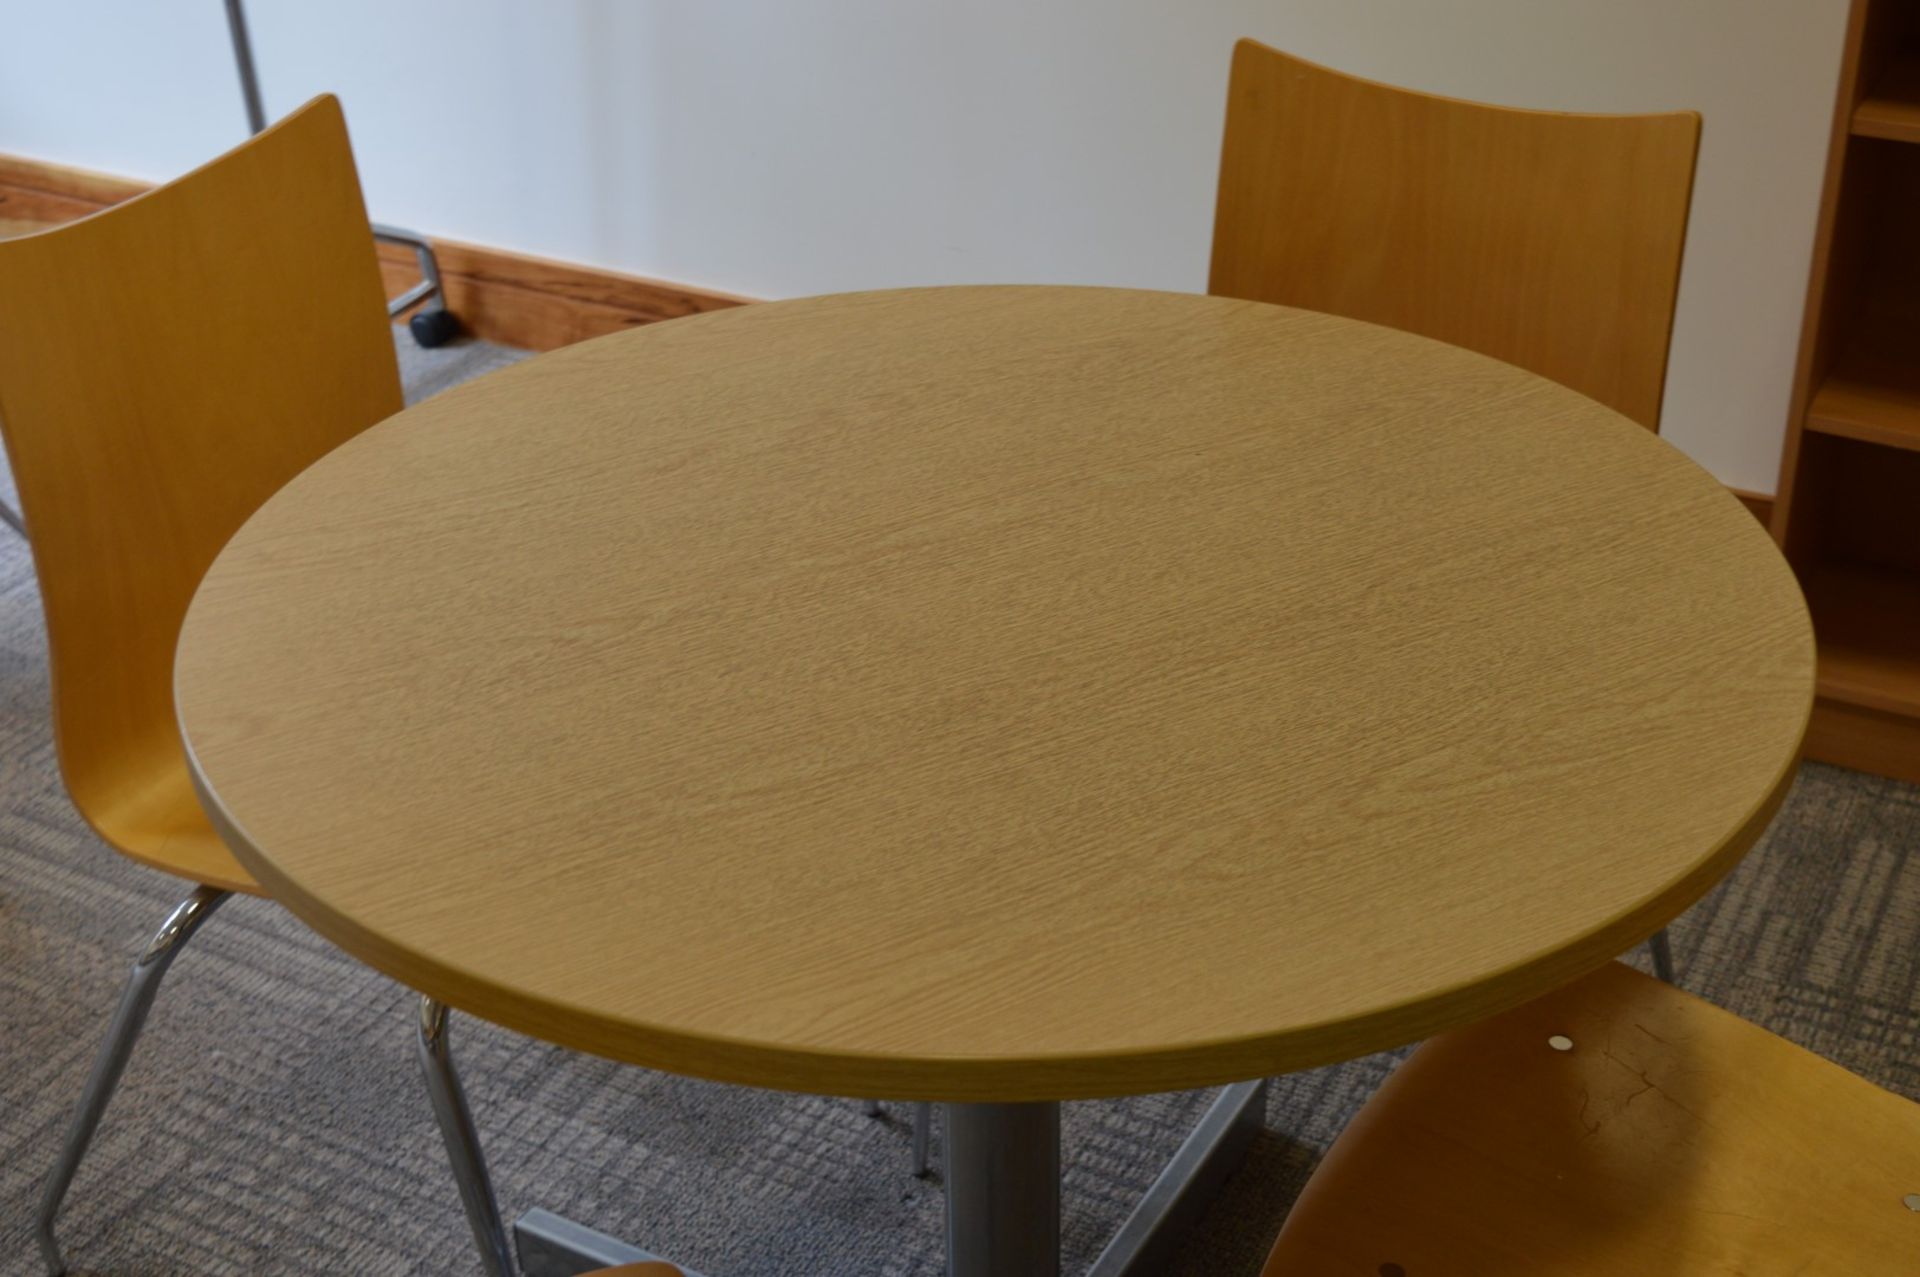 1 x Staff Room Table With Four Matching Chairs - Oak Table Finish and Beech Chairs - Contemporay - Image 4 of 4